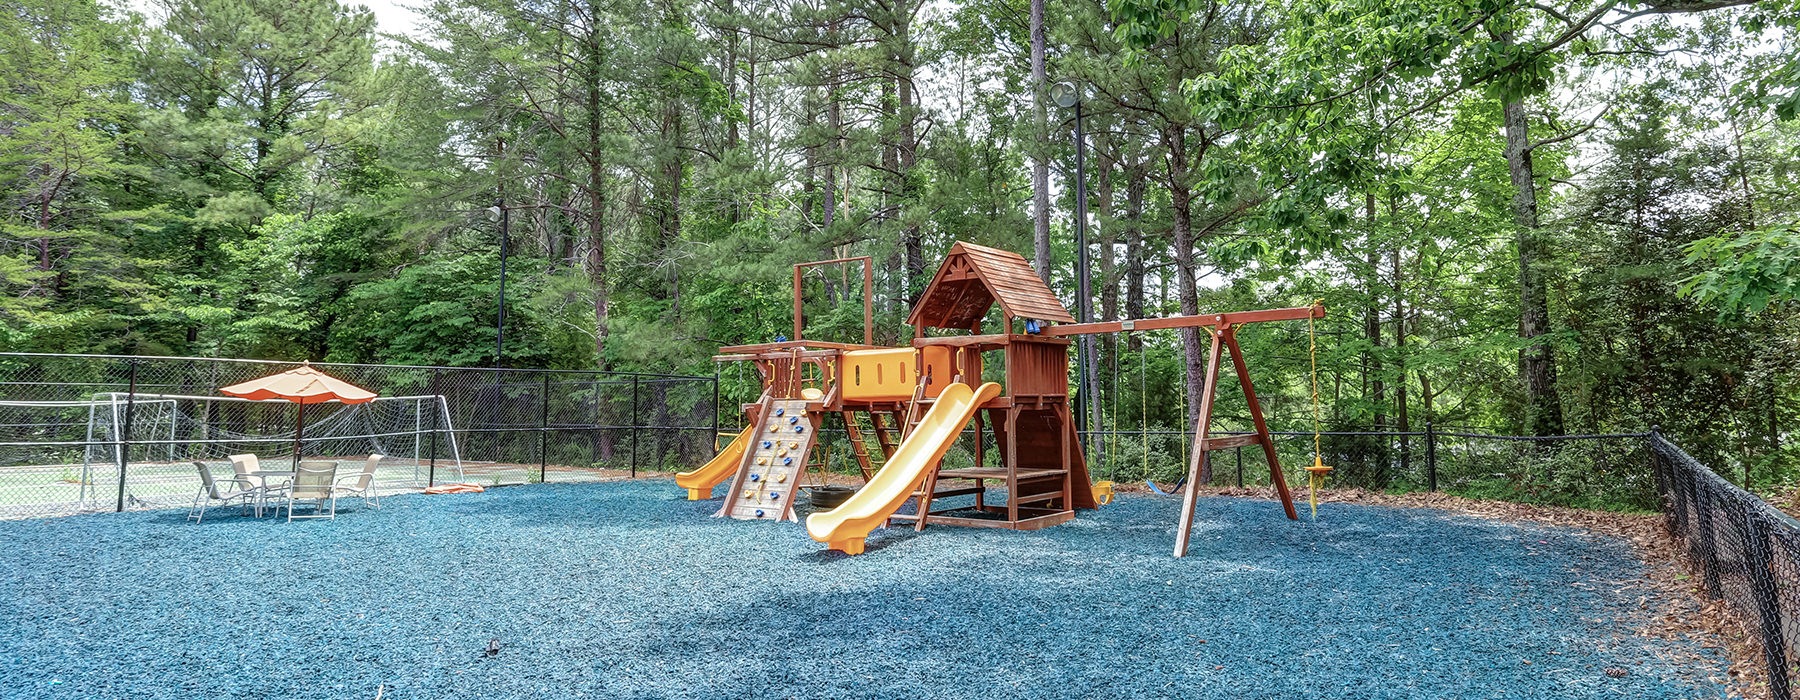 Children's playground amenity at 700 Riverchase Apartments in Hoover, AL